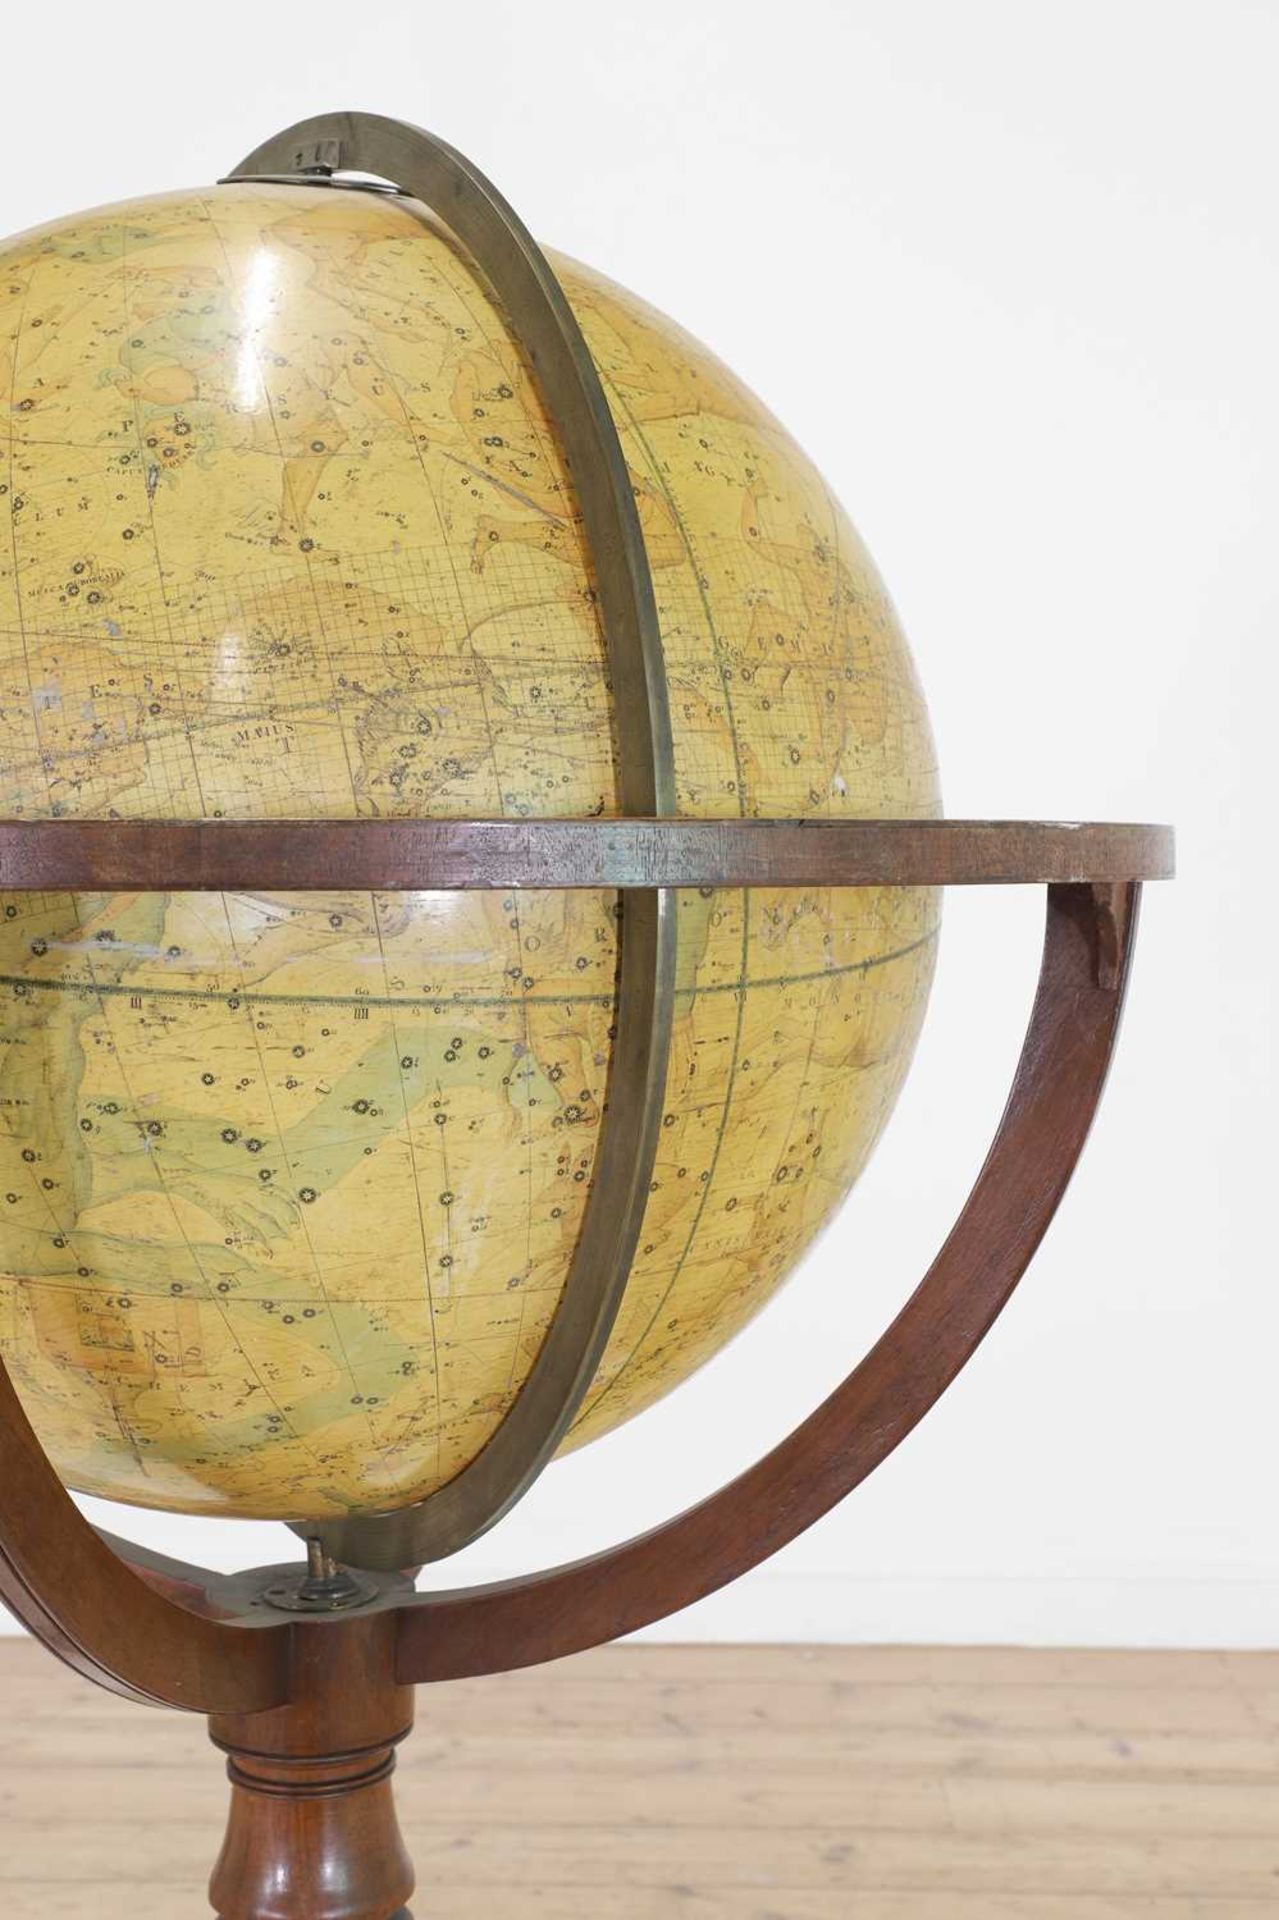 A large celestial library globe by J & W Cary, - Image 43 of 84